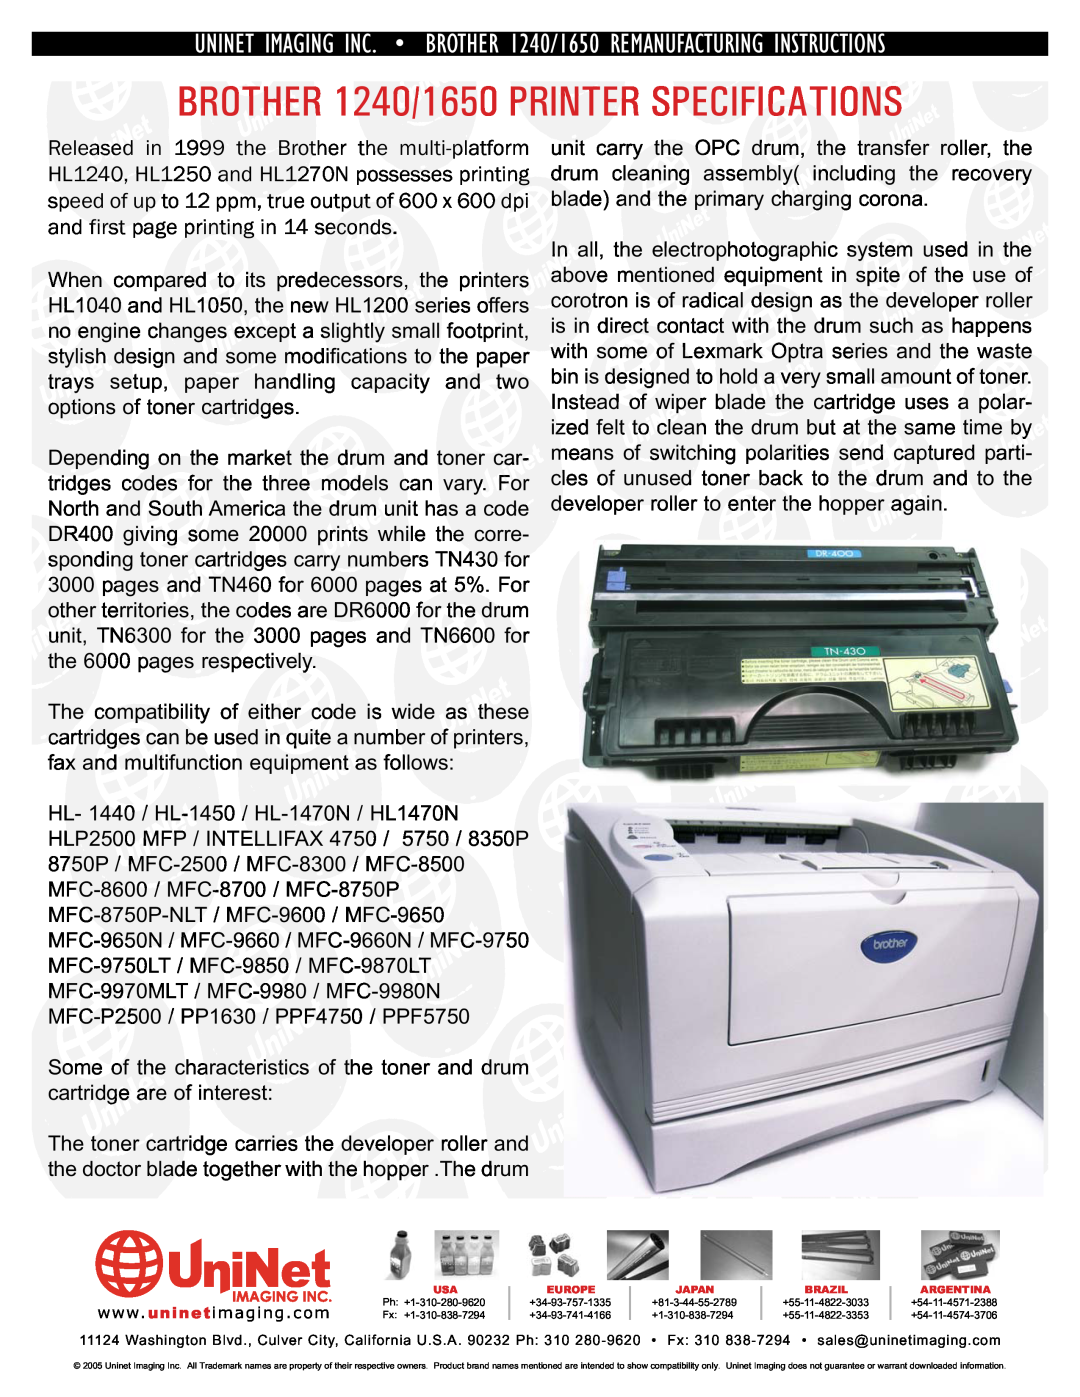 Brother UNINET IMAGING INC. BROTHER 1240/1650 REMANUFACTURING INSTRUCTIONS, BROTHER 1240/1650 PRINTER SPECIFICATIONS 